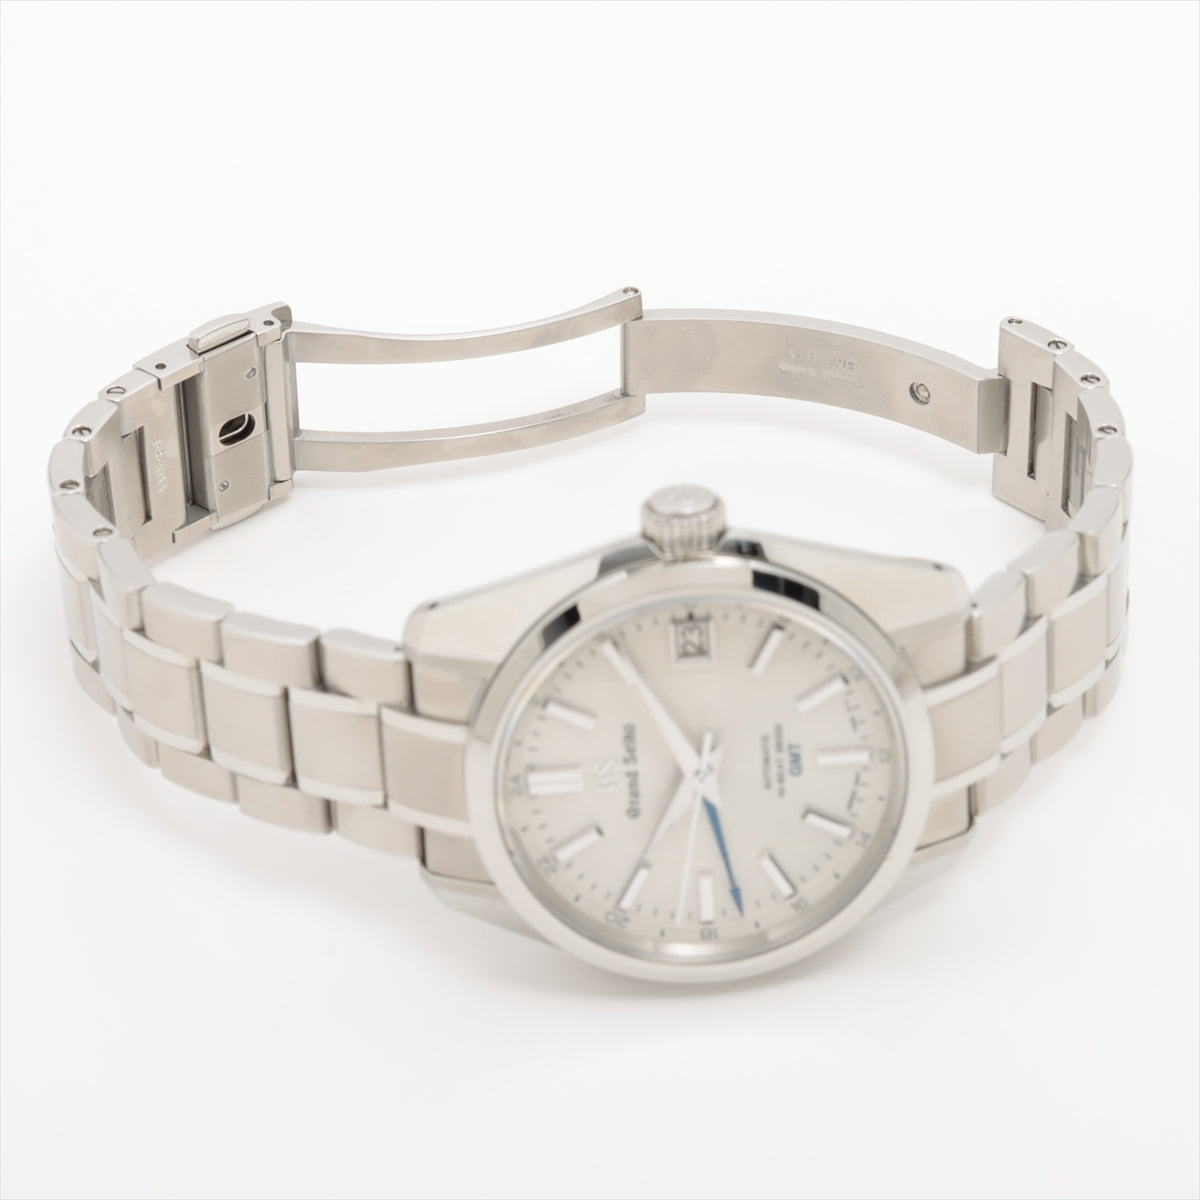 Grand Seiko Mechanical High Beat 3600 GMT SBGJ201 SS AT Silver-Face Extra-Link3